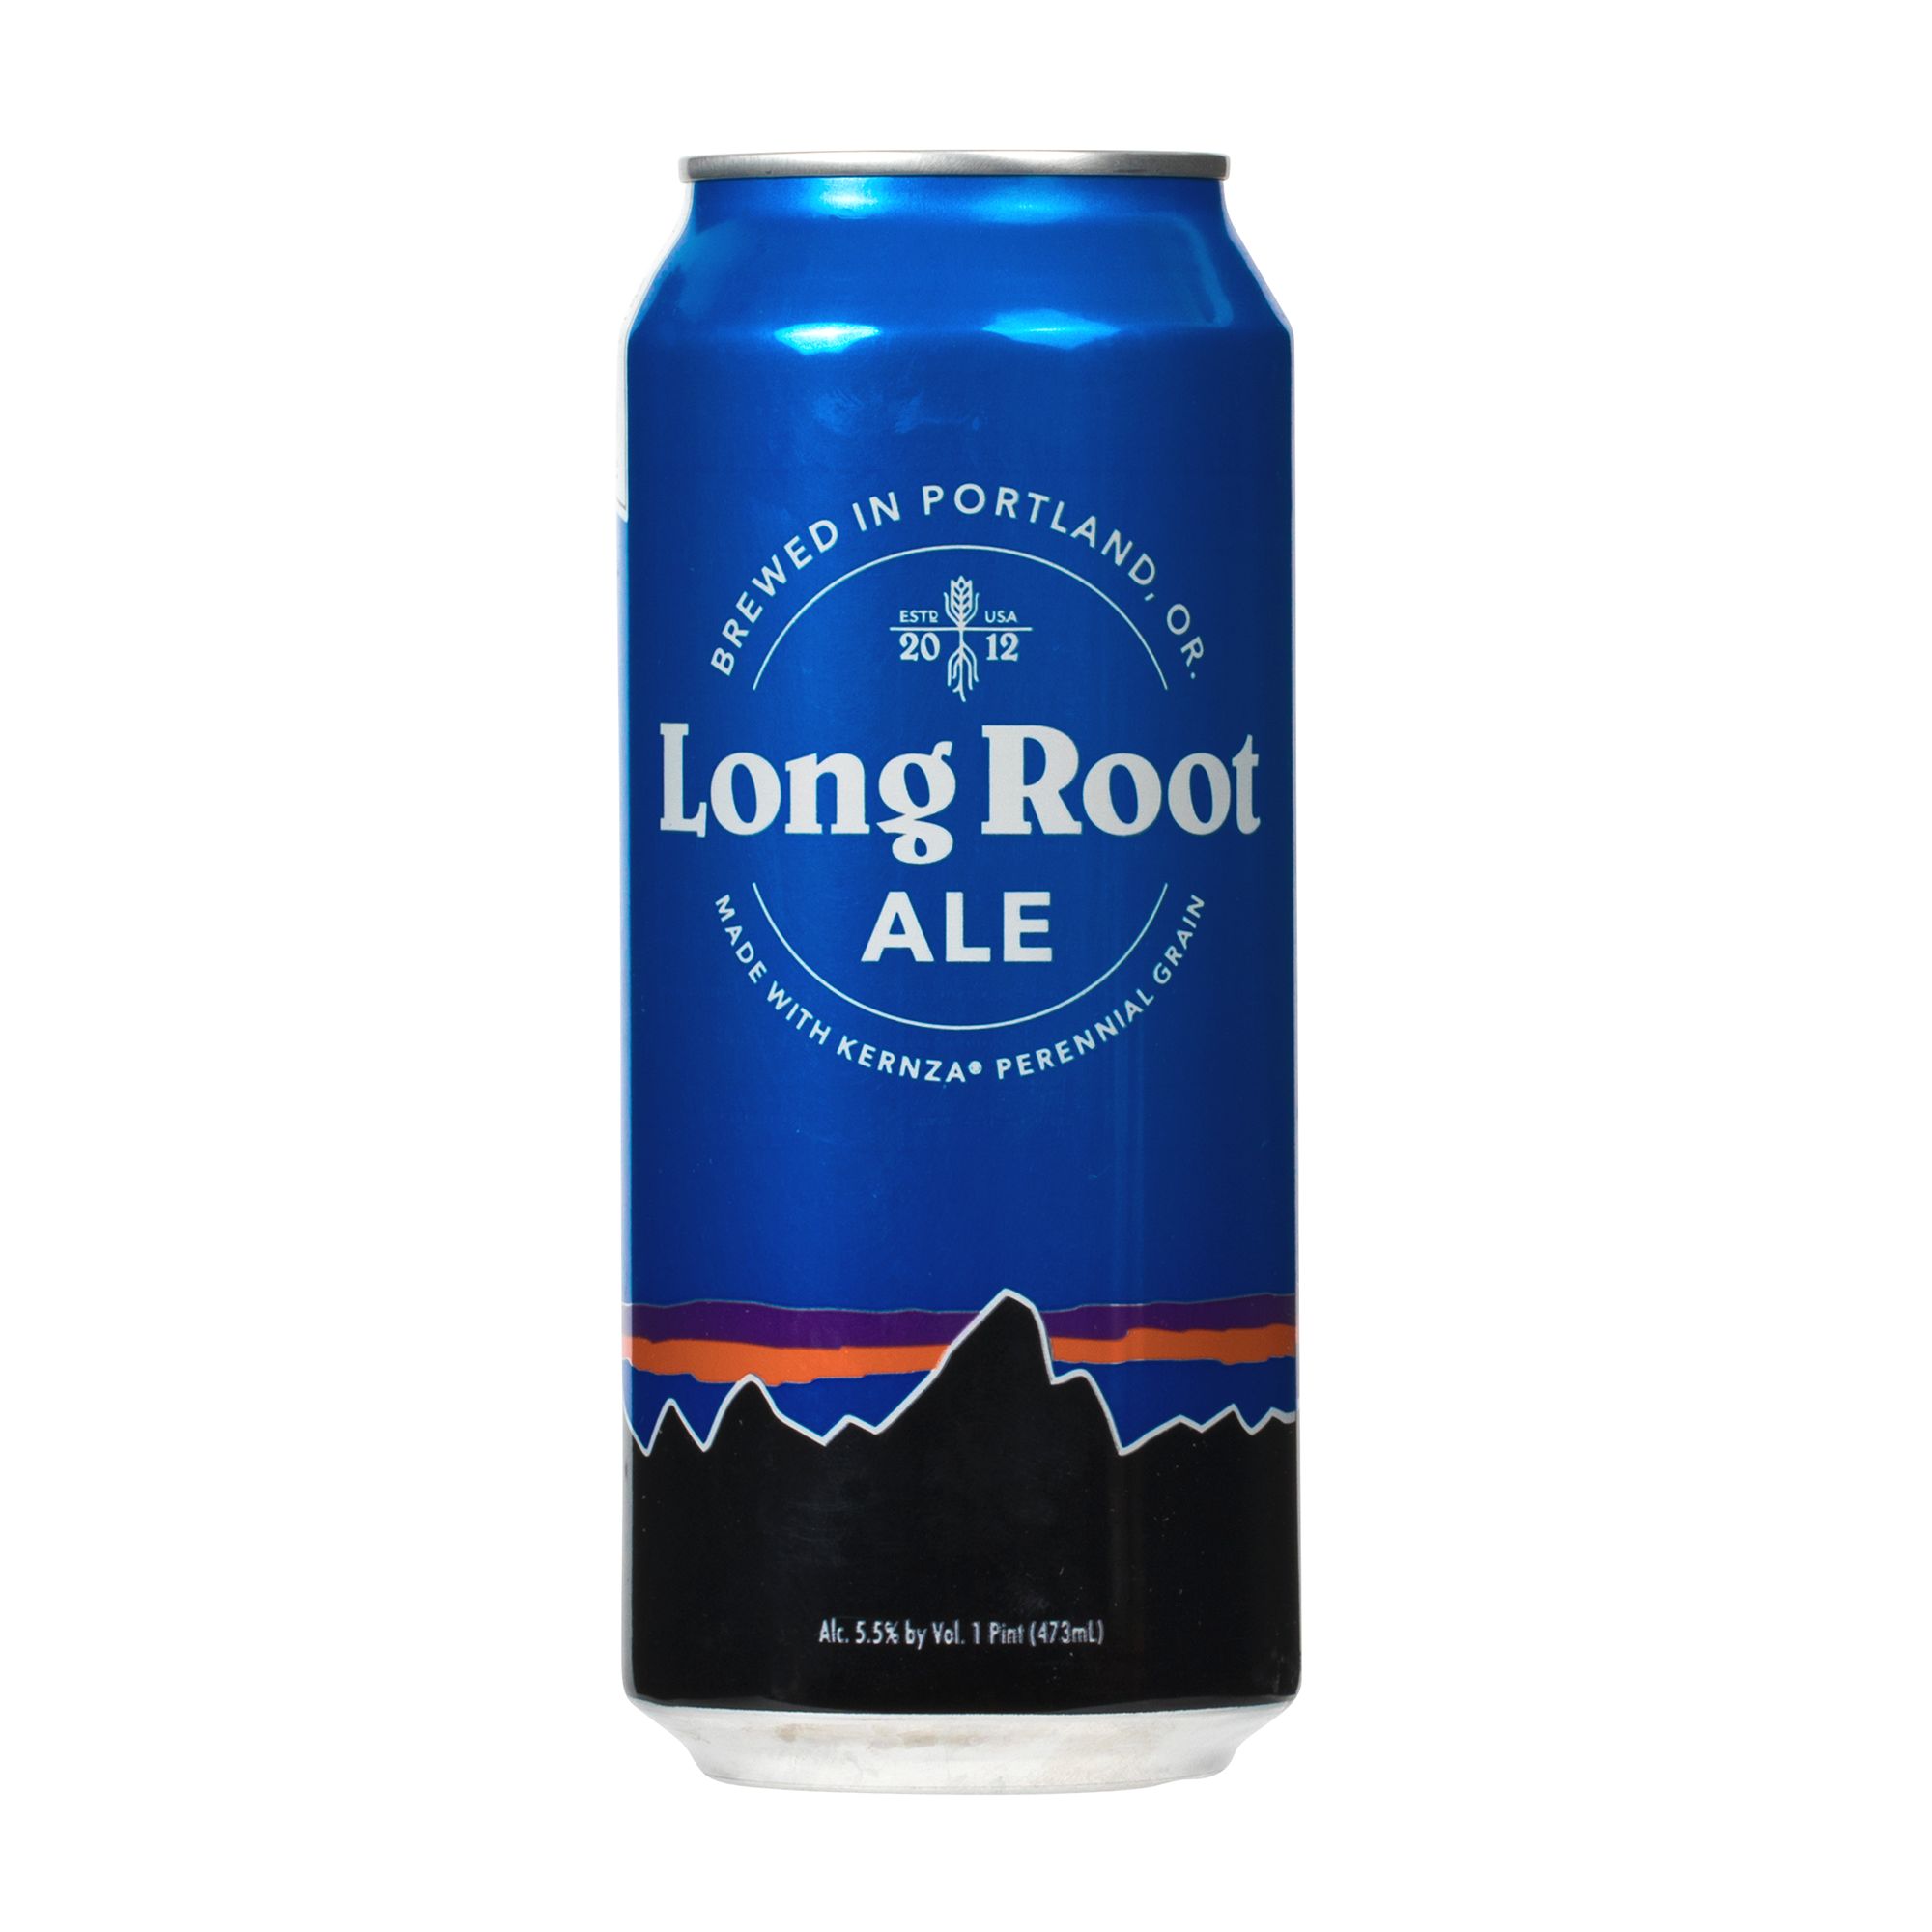 Patagonia Provisions Long Root Ale